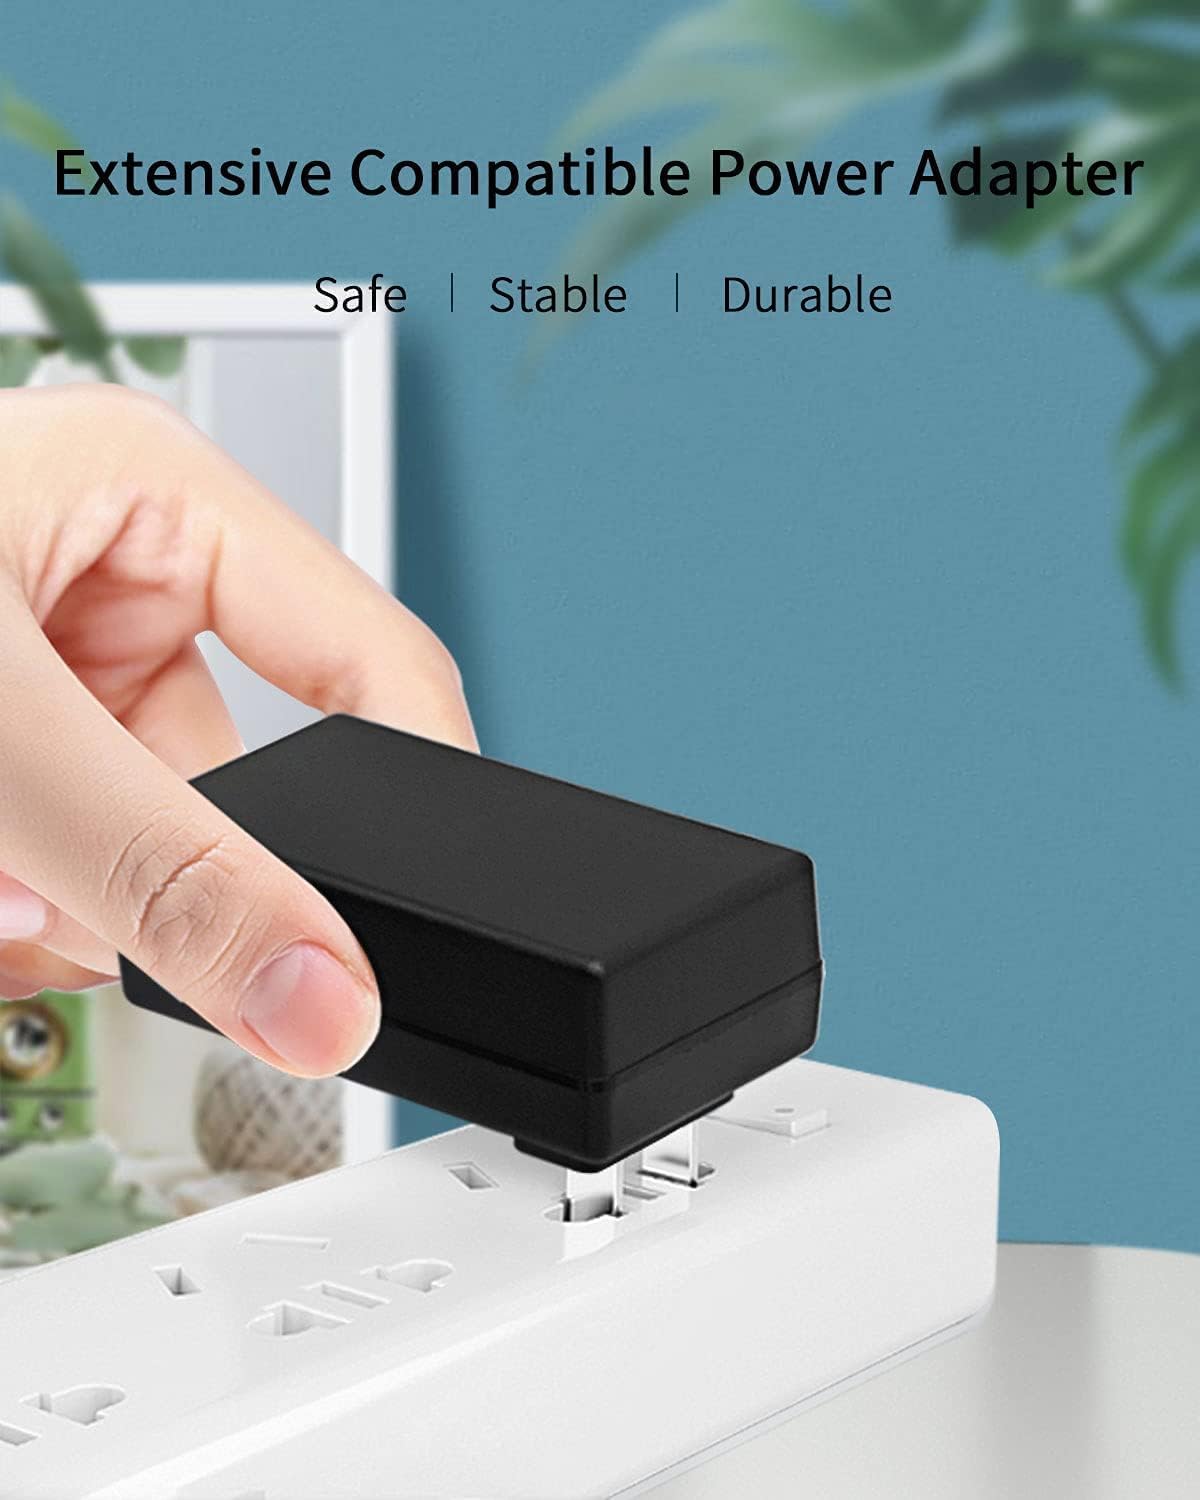 Crystal Vision Replacement Camera Power Adapter for replacement. UL Listed